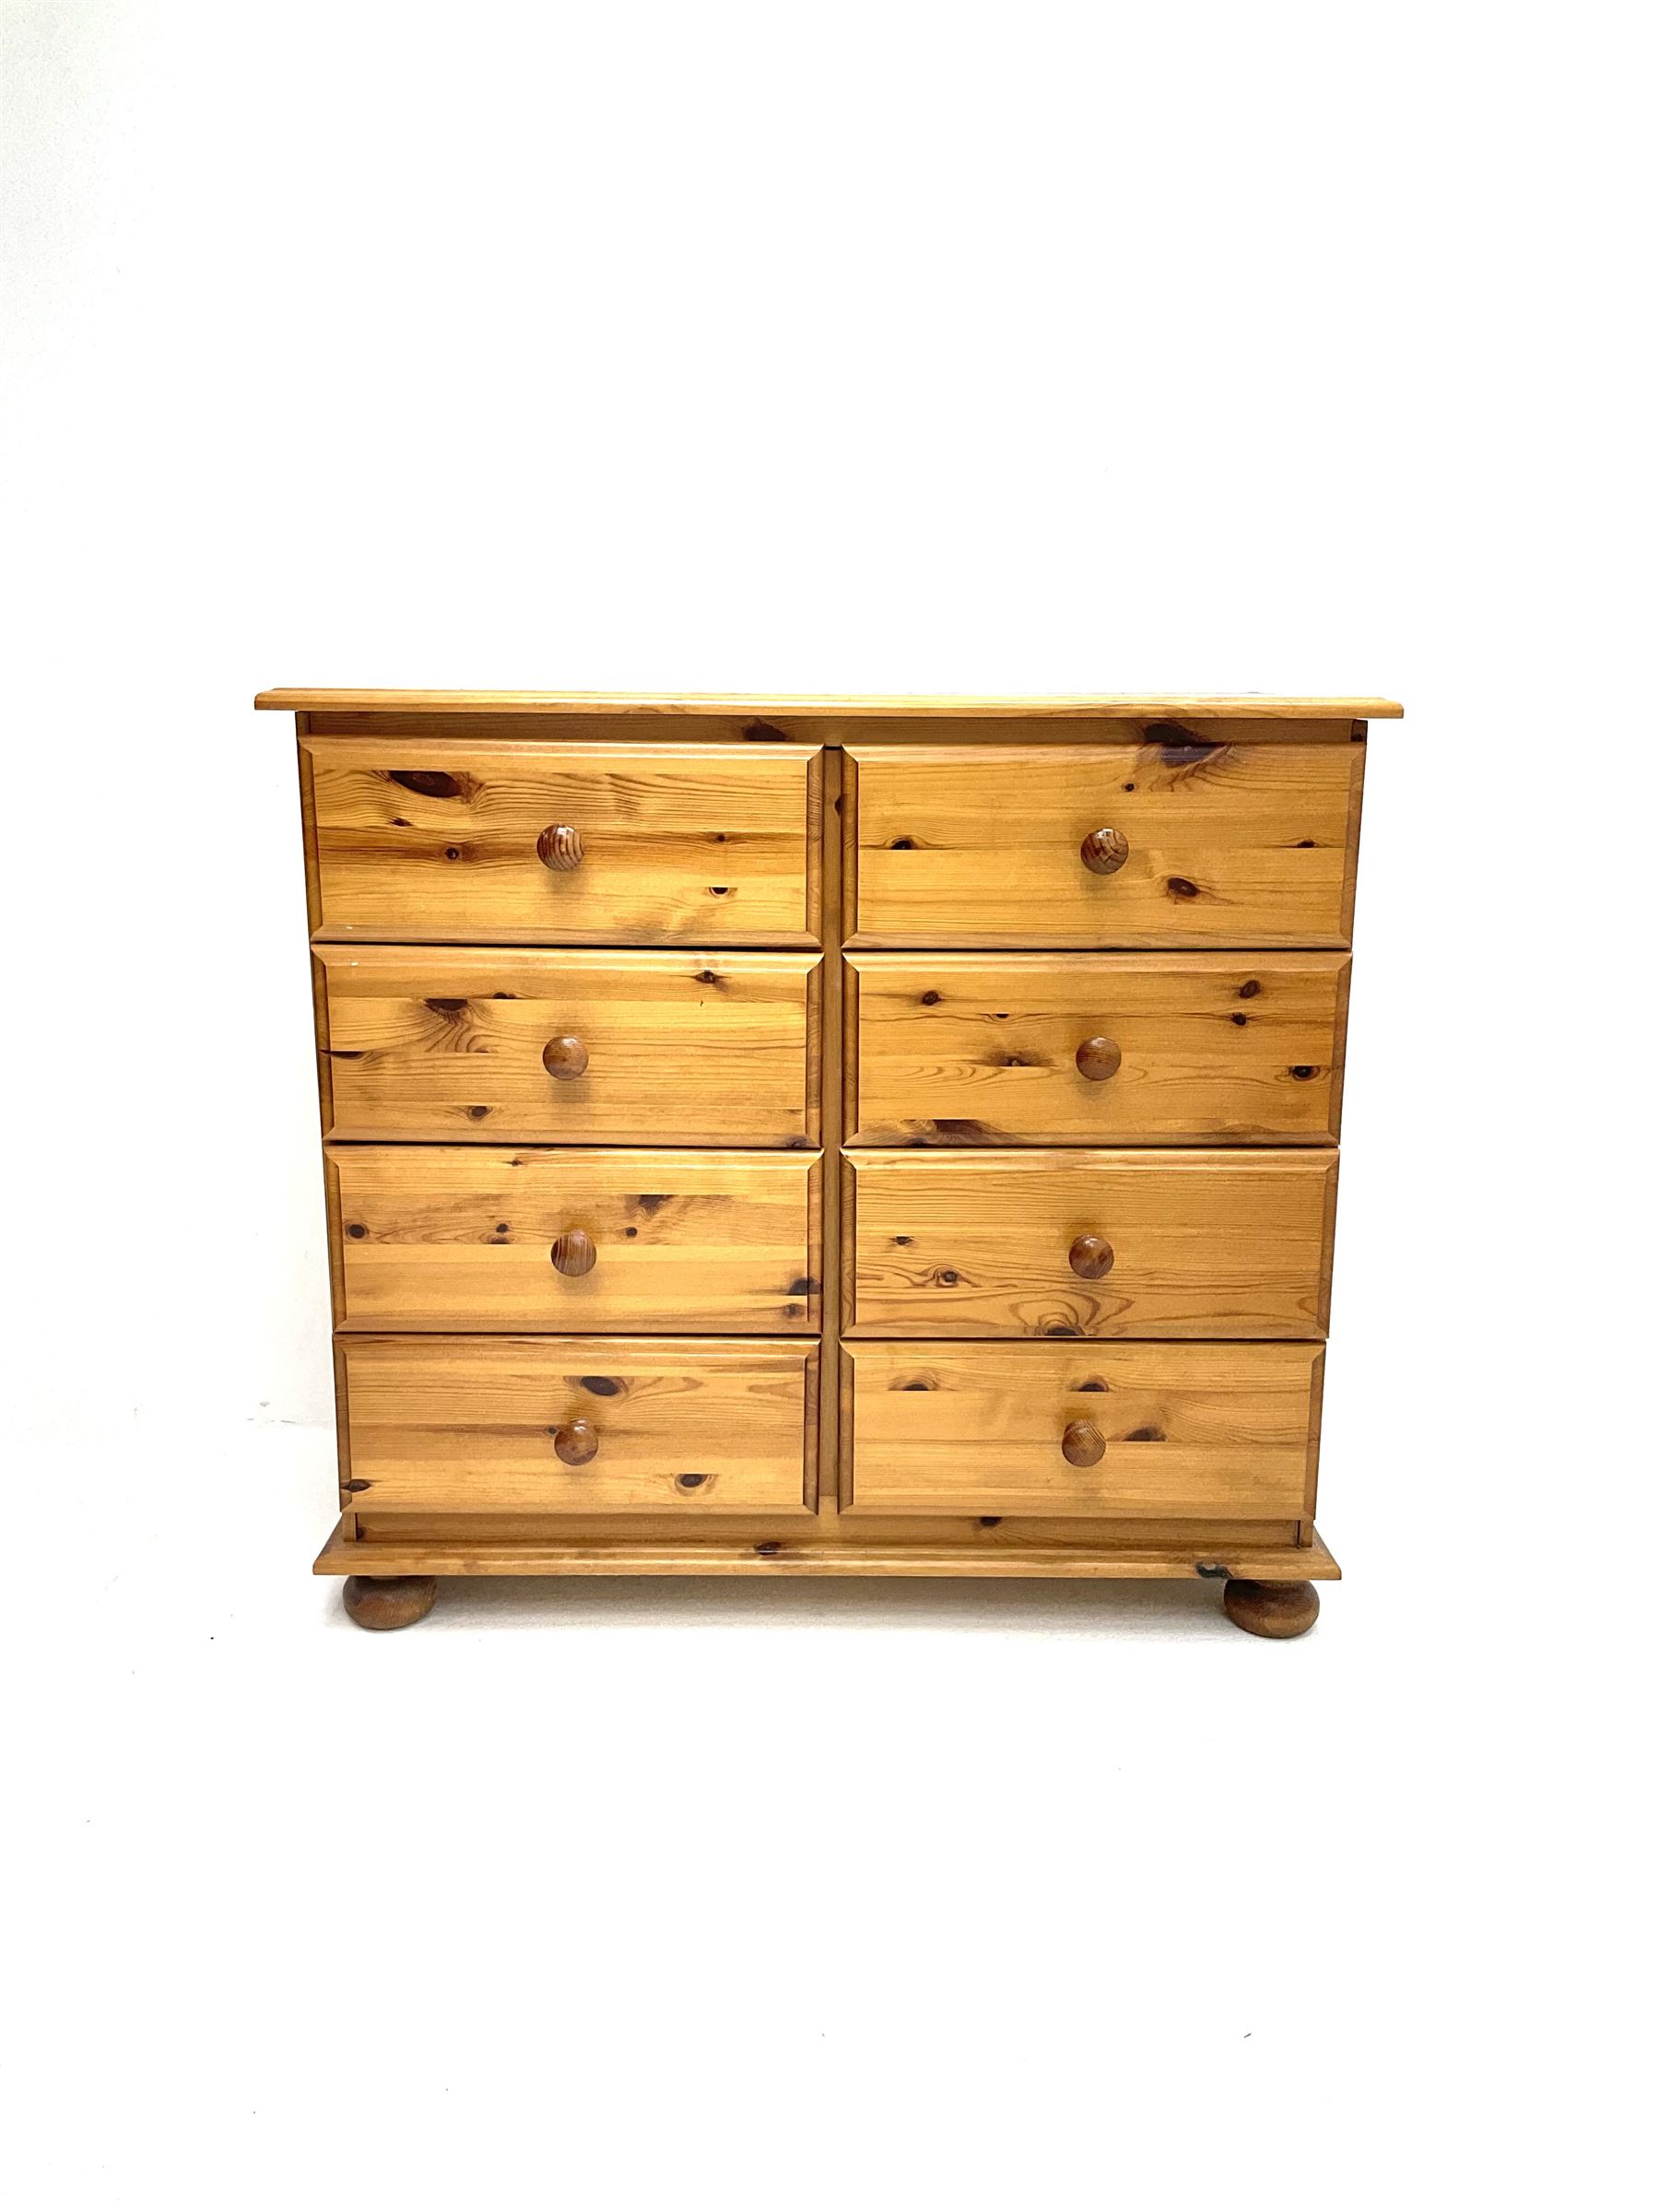 Polished pine chest fitted with eight drawers